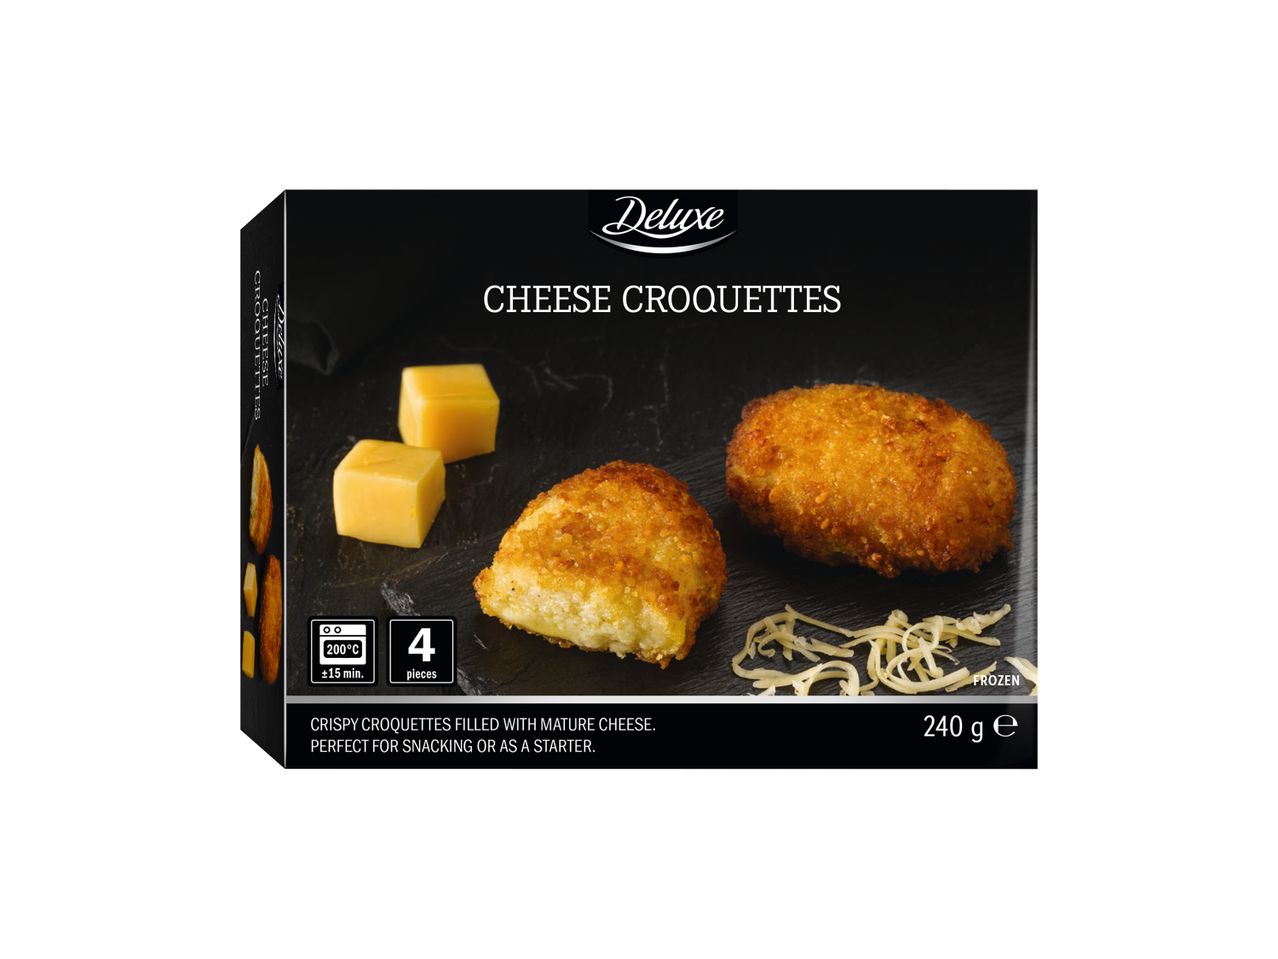 Go to full screen view: Oven Cheese Croquettes - Image 1